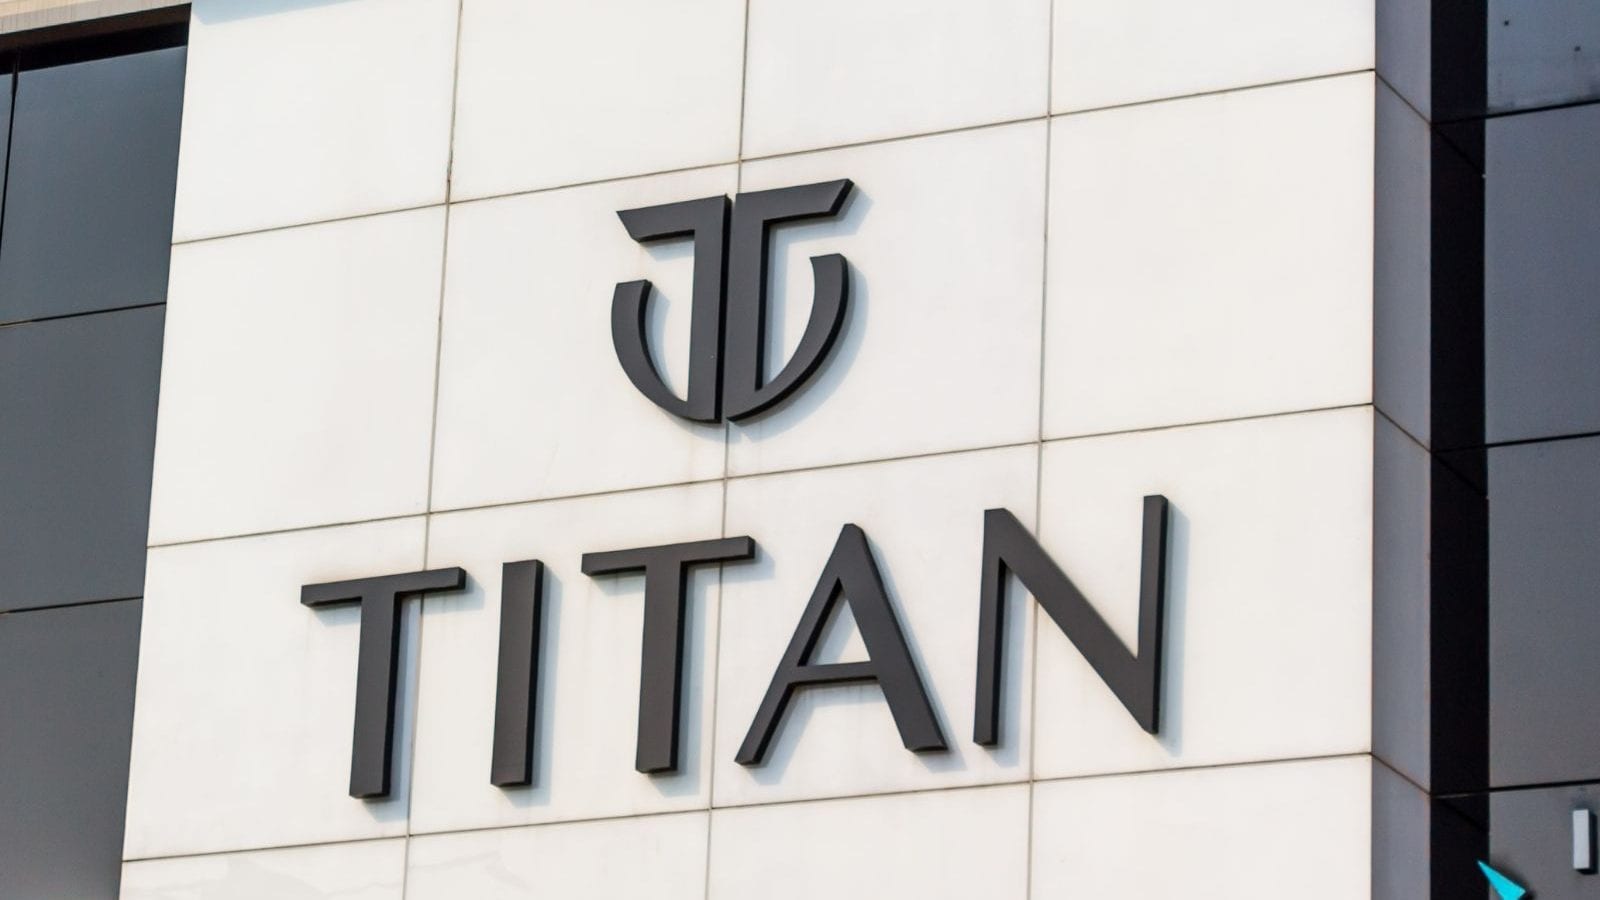 Titan Shares Rally Over 5% After Strong Q2 Results; Should you Buy, Sell or Hold?